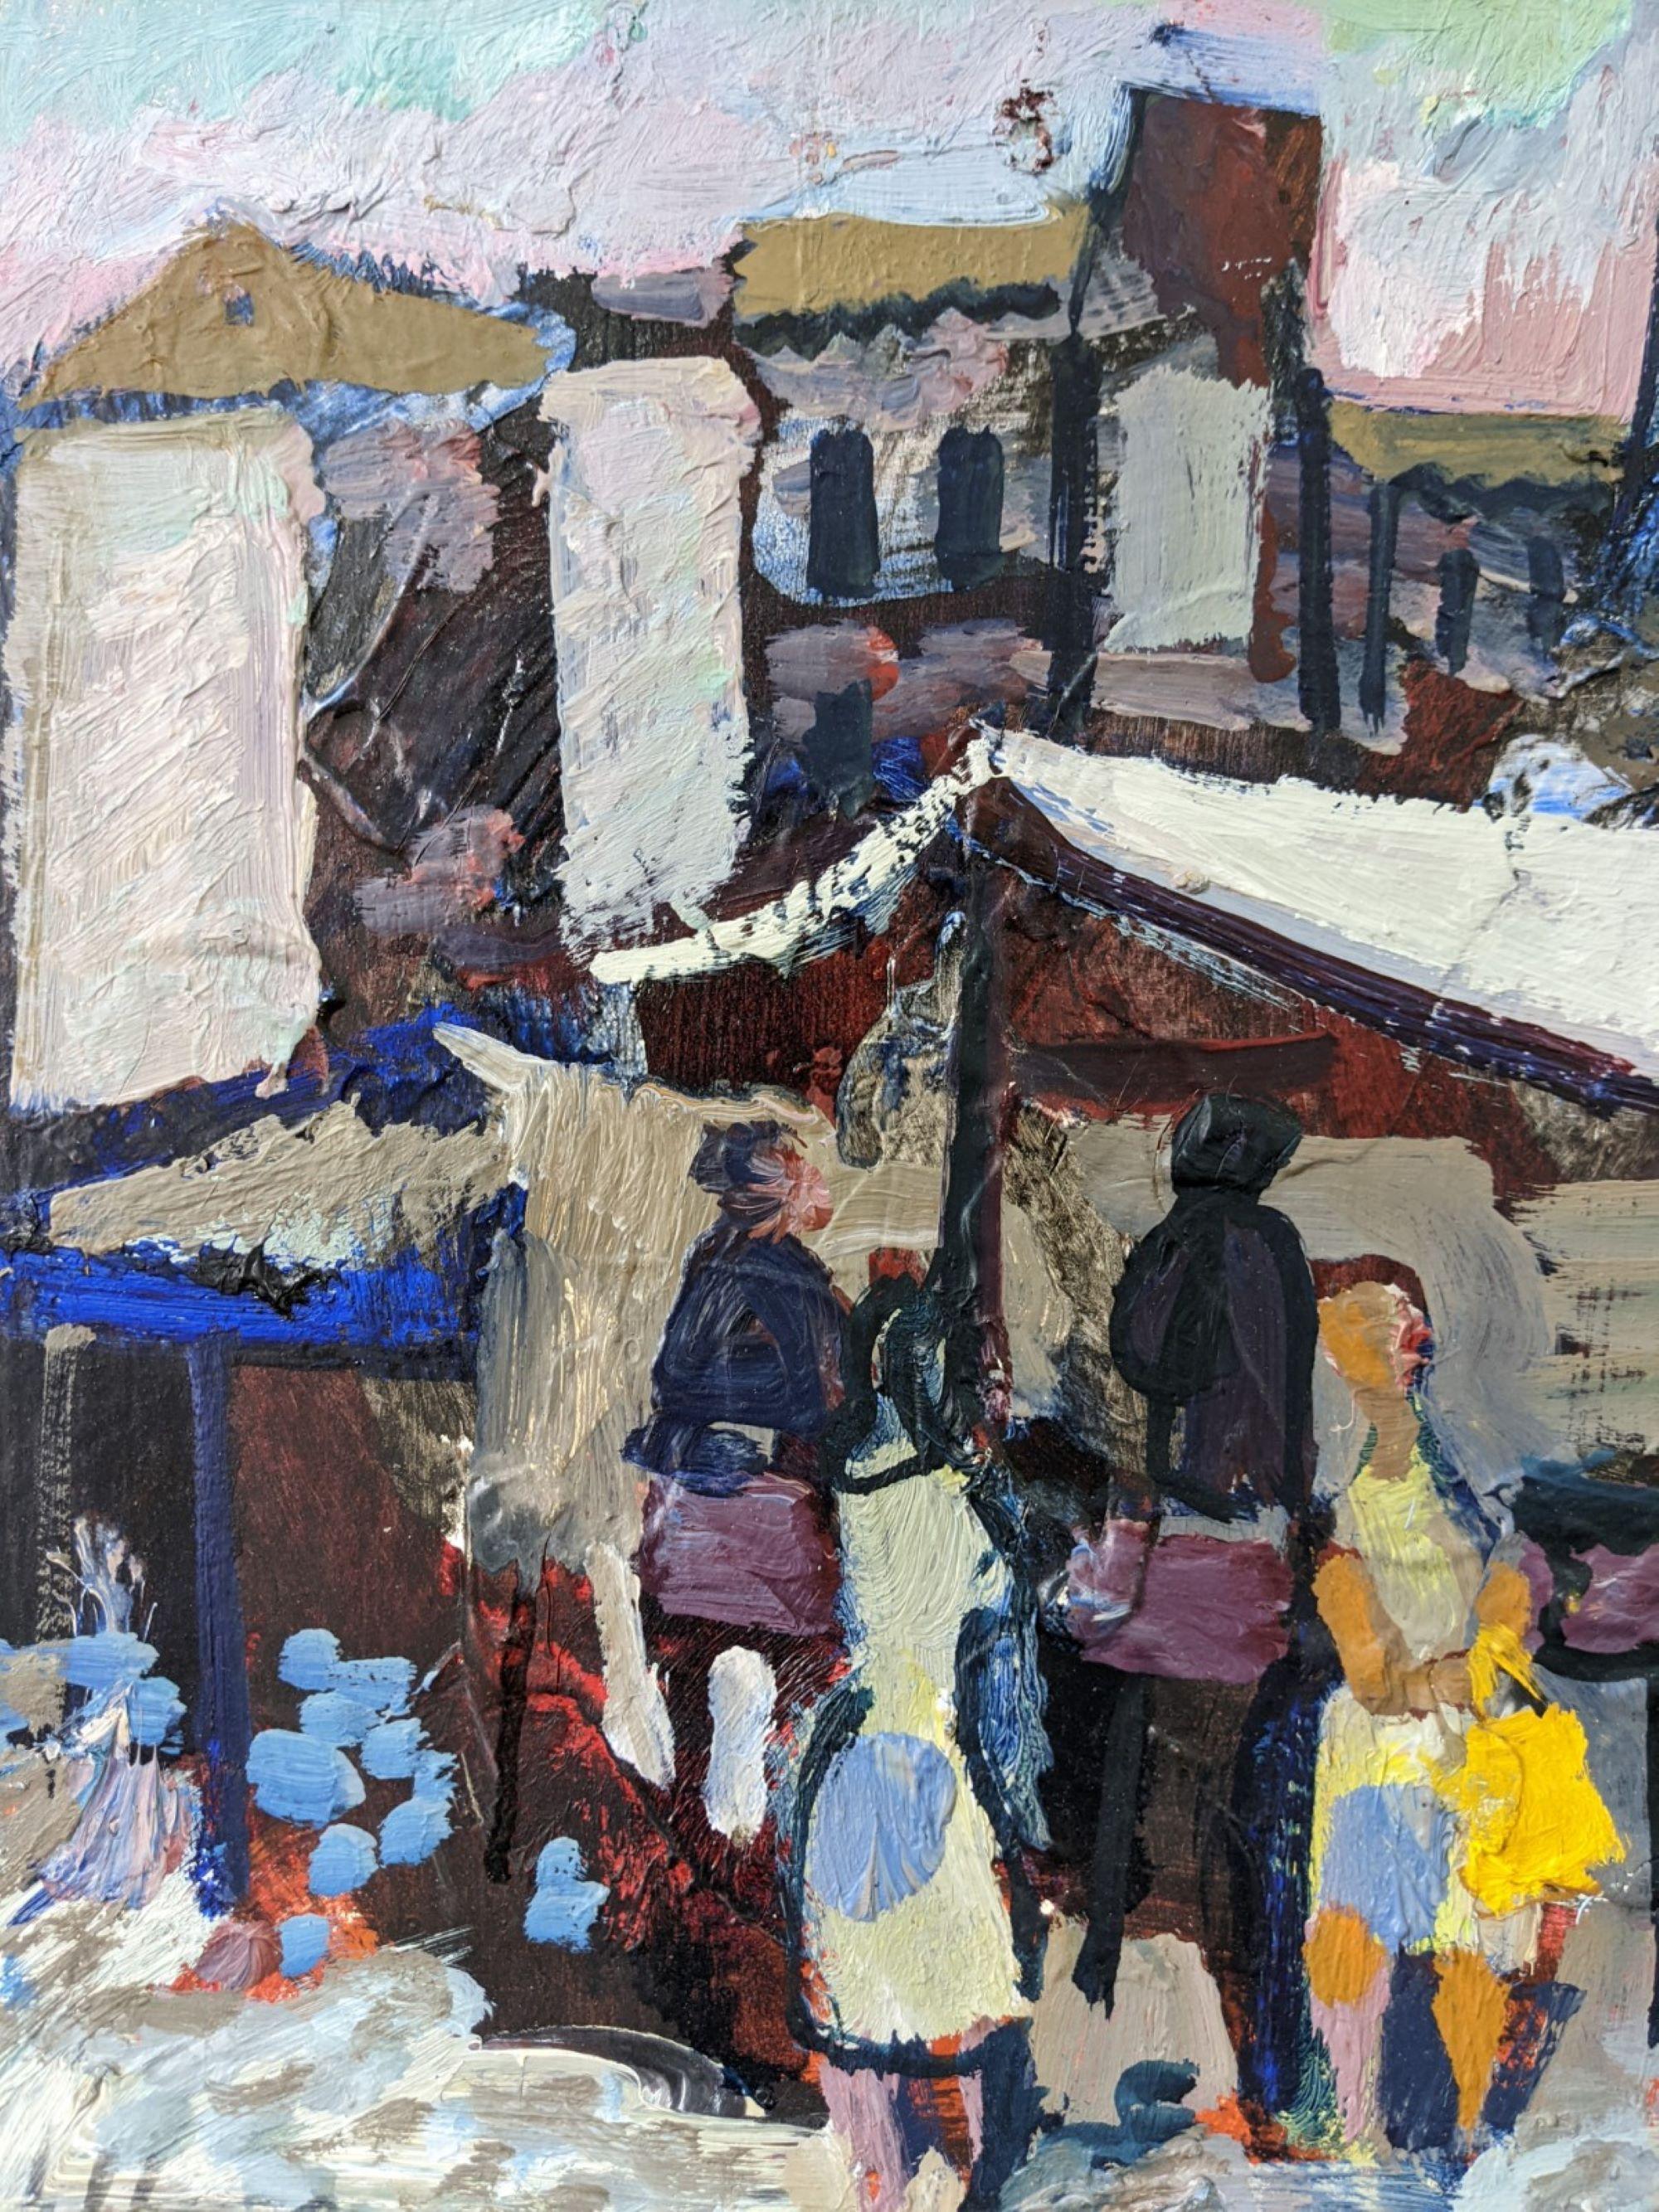 VILLAGE MARKET
Size: 39.5 x 85 cm (including frame)
Oil on board

An outstanding mid century modernist composition in oil, painted onto board.

The composition presents a bustling village scene where a group of female figures in the foreground are